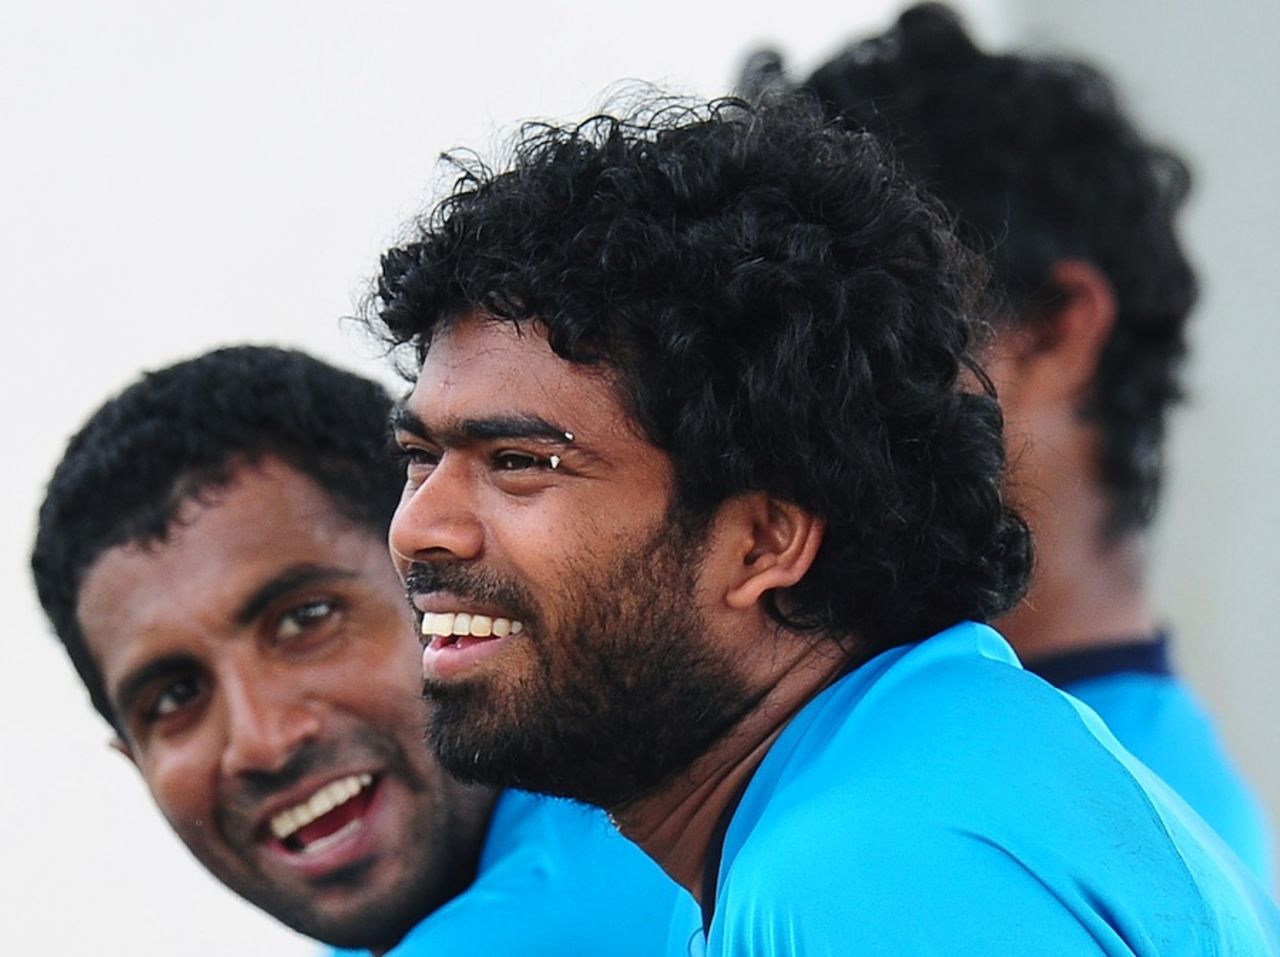 Lasith Malinga has a laugh during a net session on the eve of the first ODI against Pakistan, Hambantota, August 22, 2014